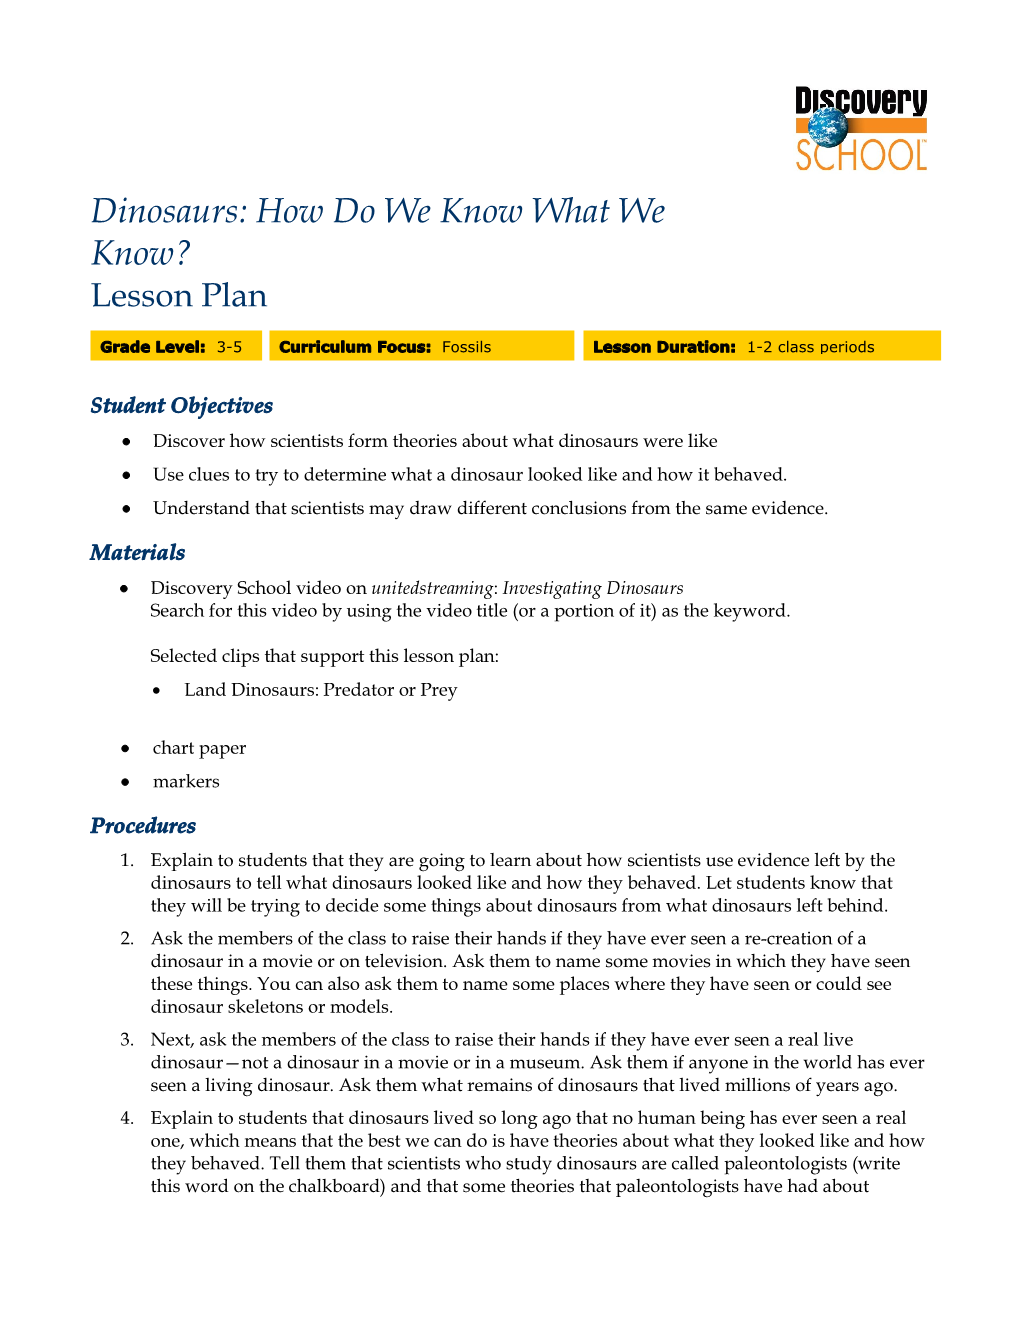 Dinosaurs: How Do We Know What We Know? Lesson Plan